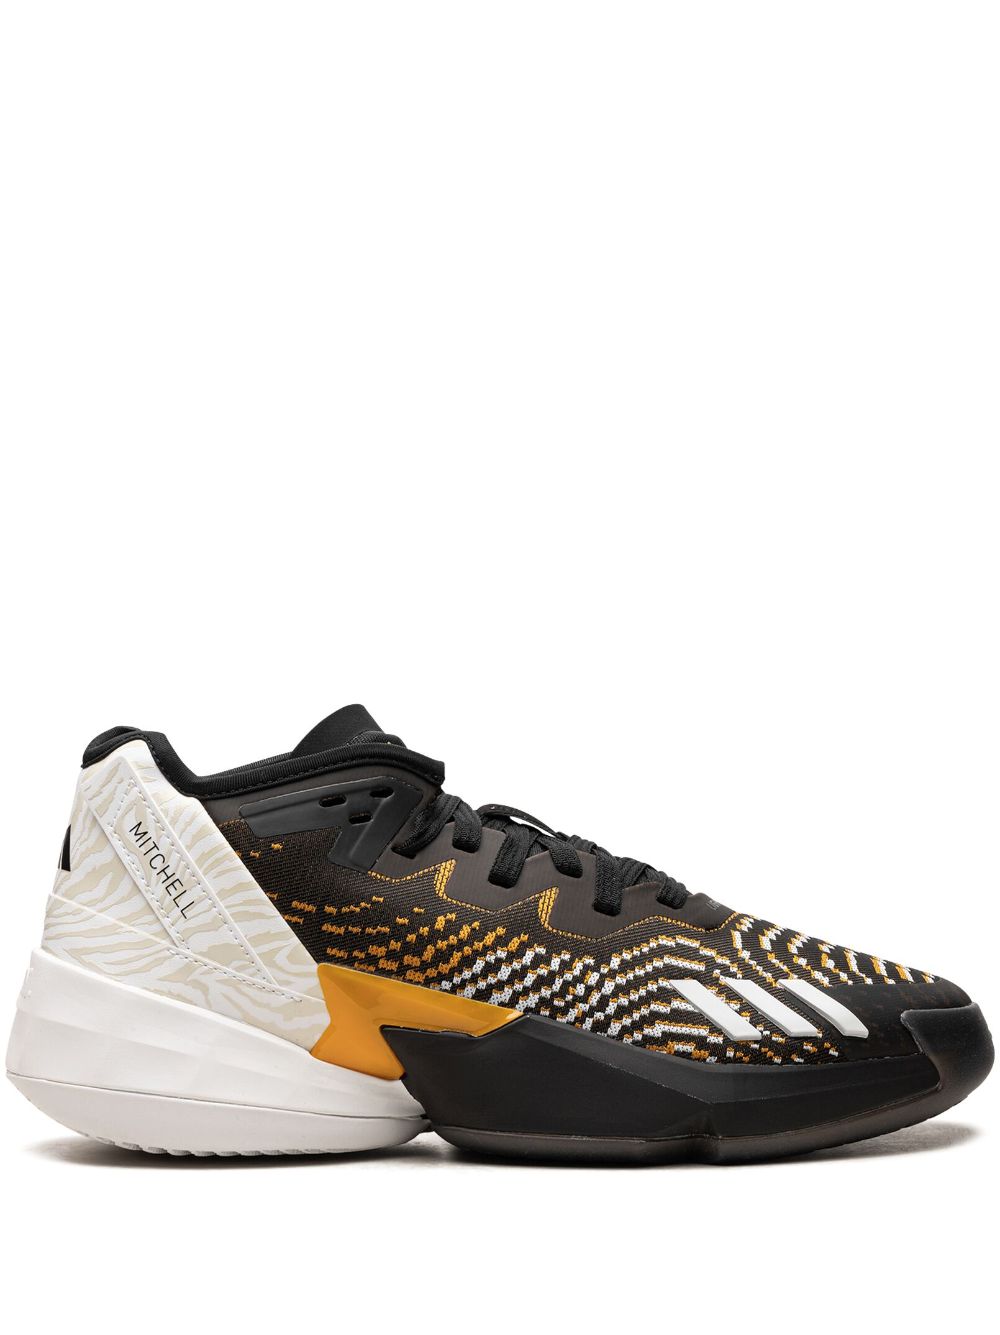 adidas D.O.N Issue 4 "Grambling State" sneakers - Black von adidas